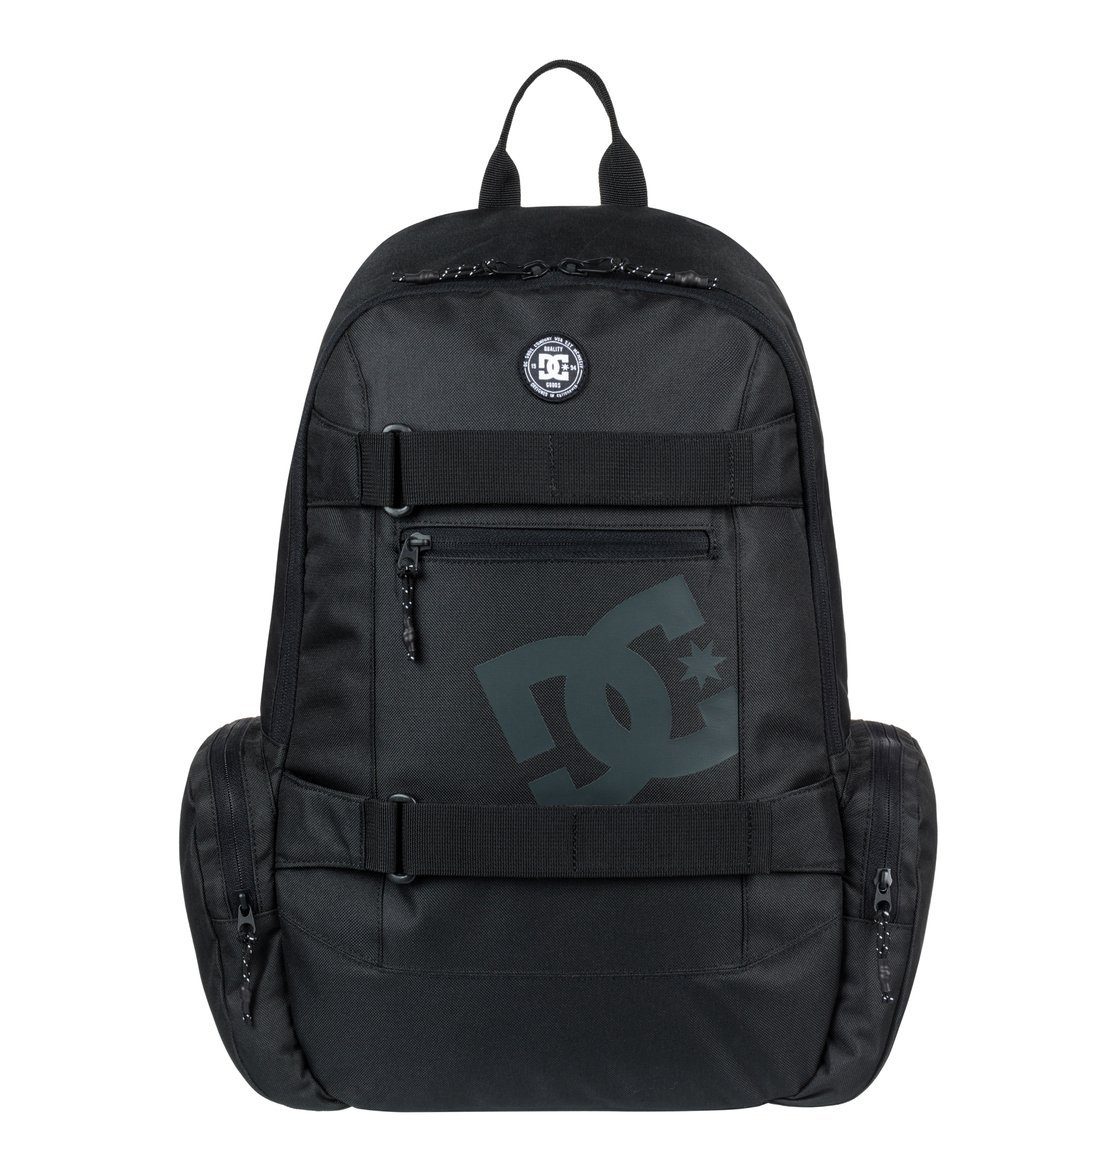 Otto - Dc Shoes NU 15% KORTING: DC Shoes Medium Rugzak The Breed 26L